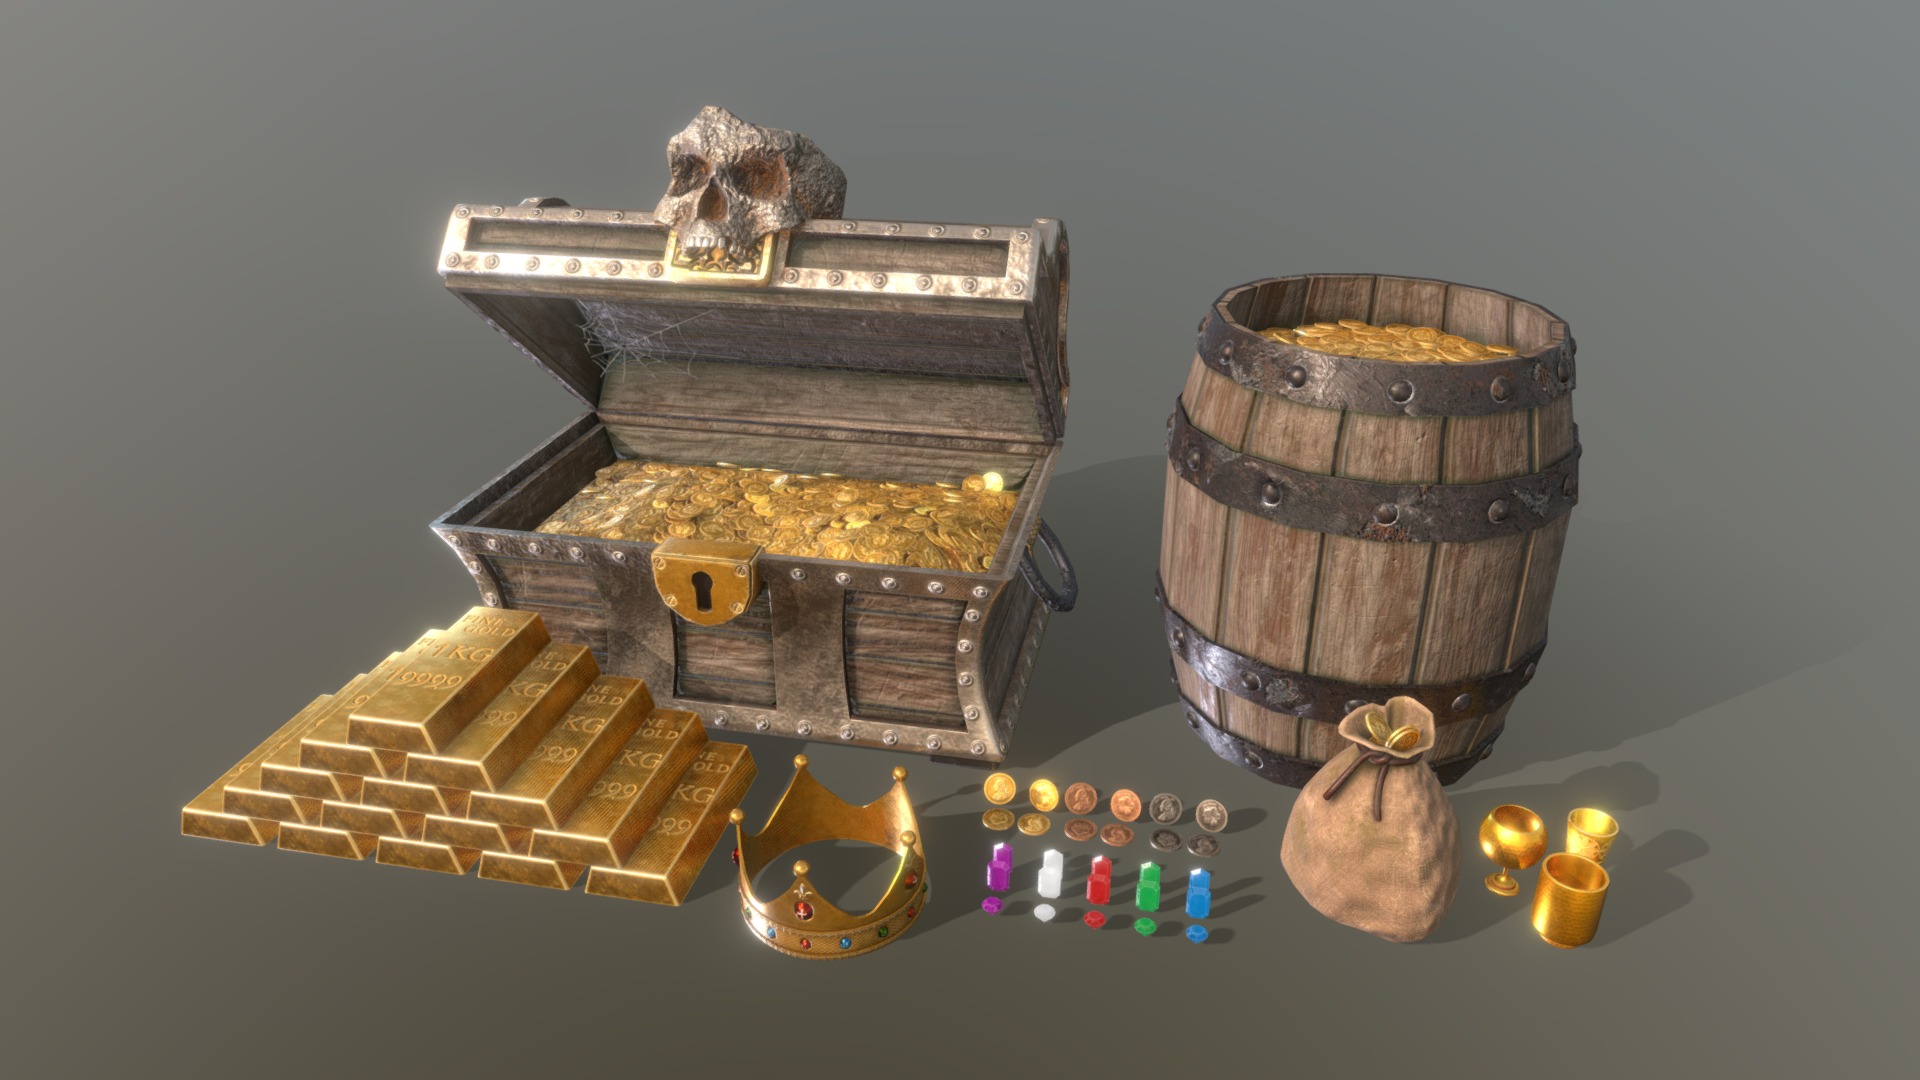 3D model HIE Treasure Pack D180518 - This is a 3D model of the HIE Treasure Pack D180518. The 3D model is about a game board with a wooden block and a wooden block.